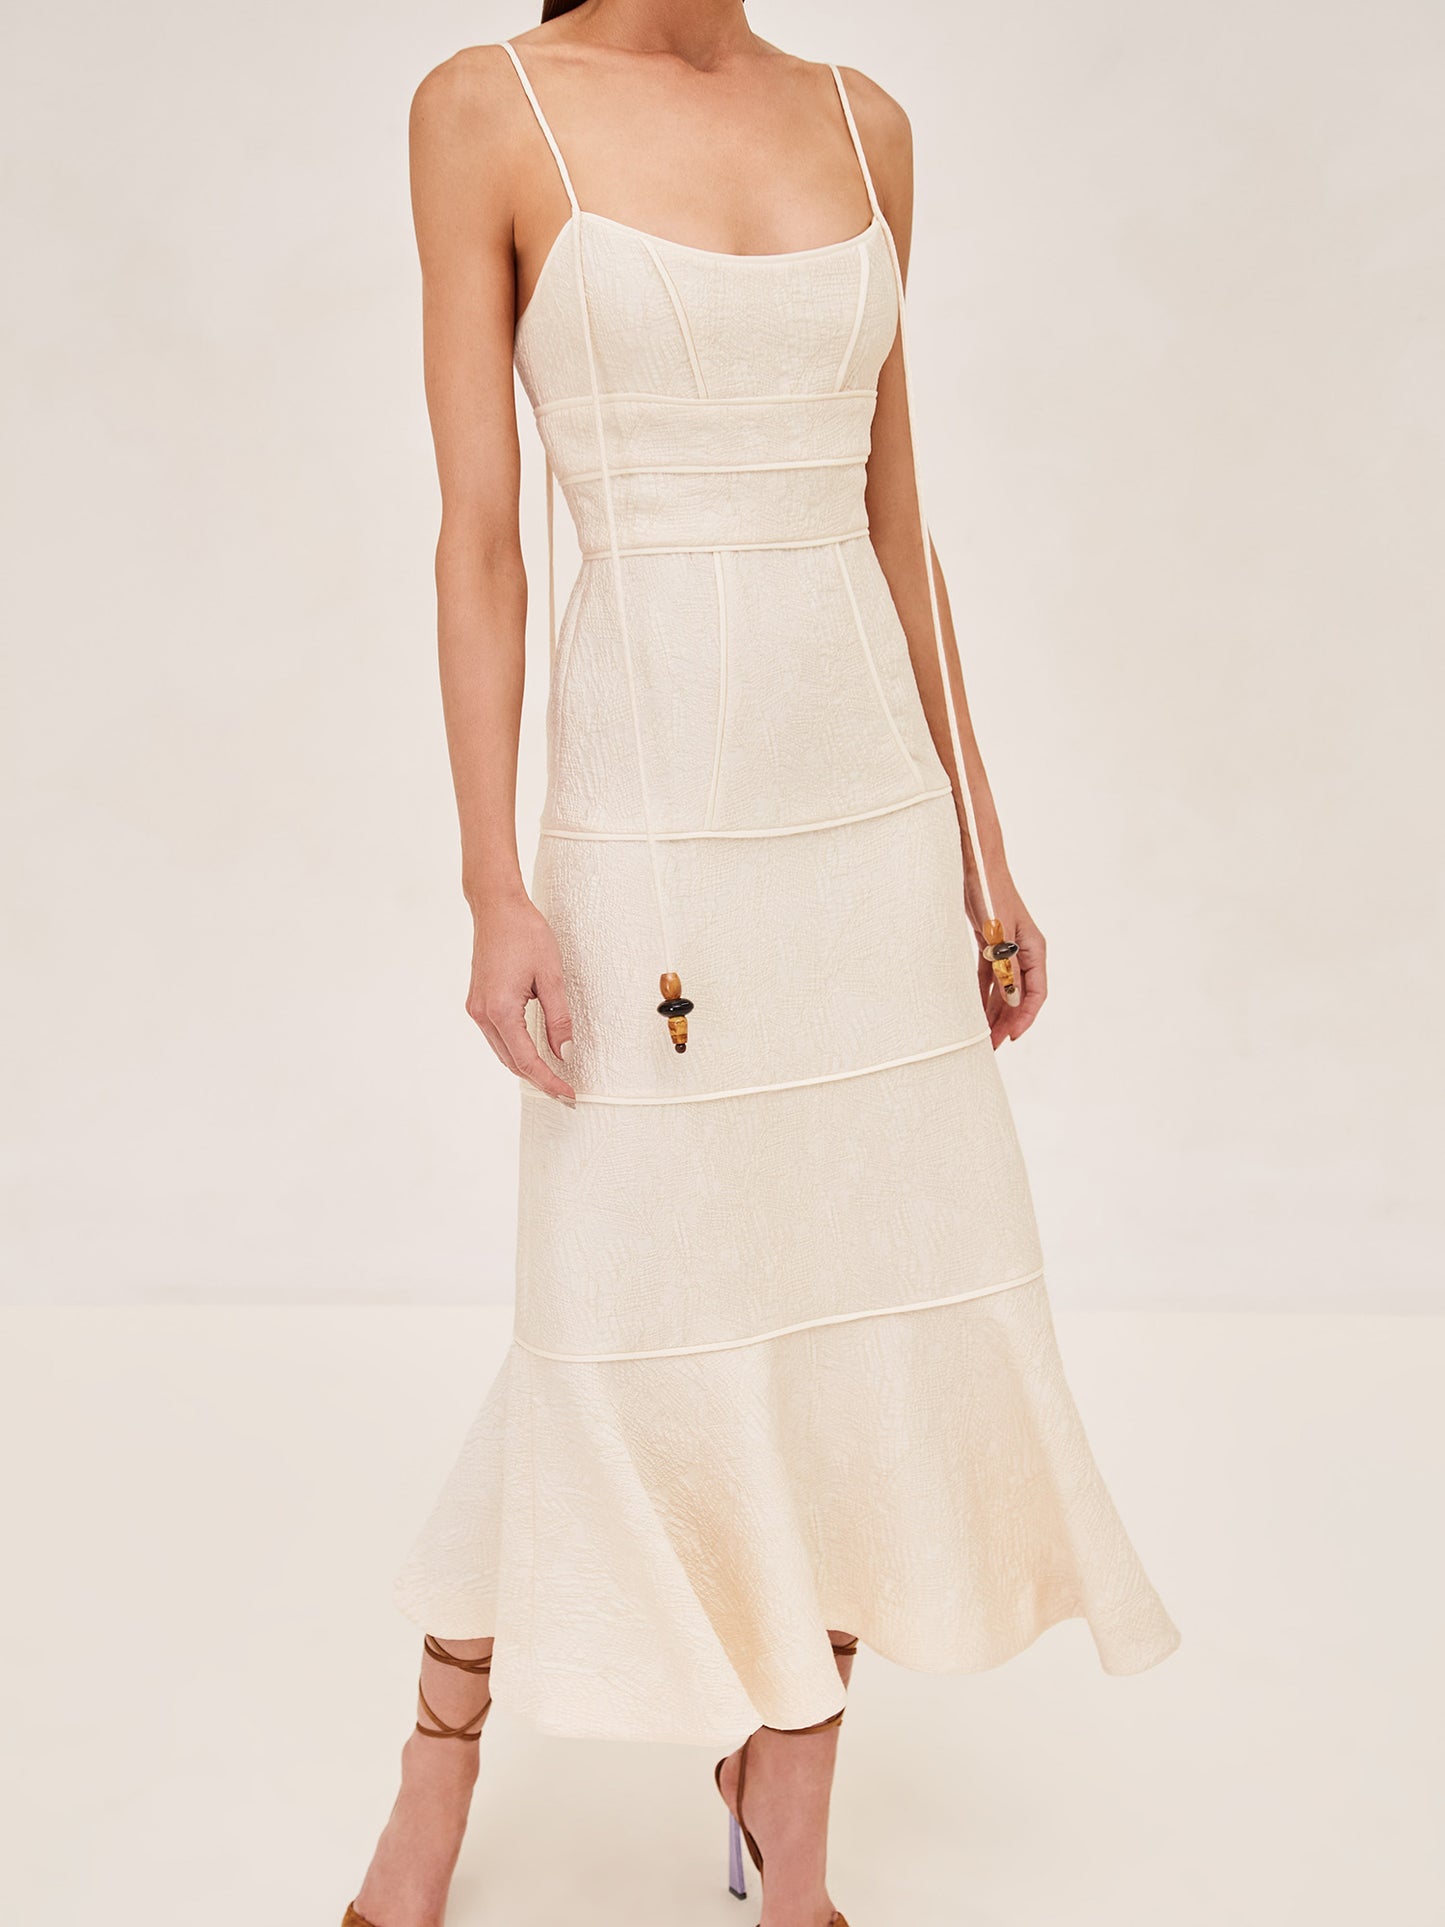 ALEXIS Vereda sleevless Midi dress with long staps and a bead detail on strap in ivory.